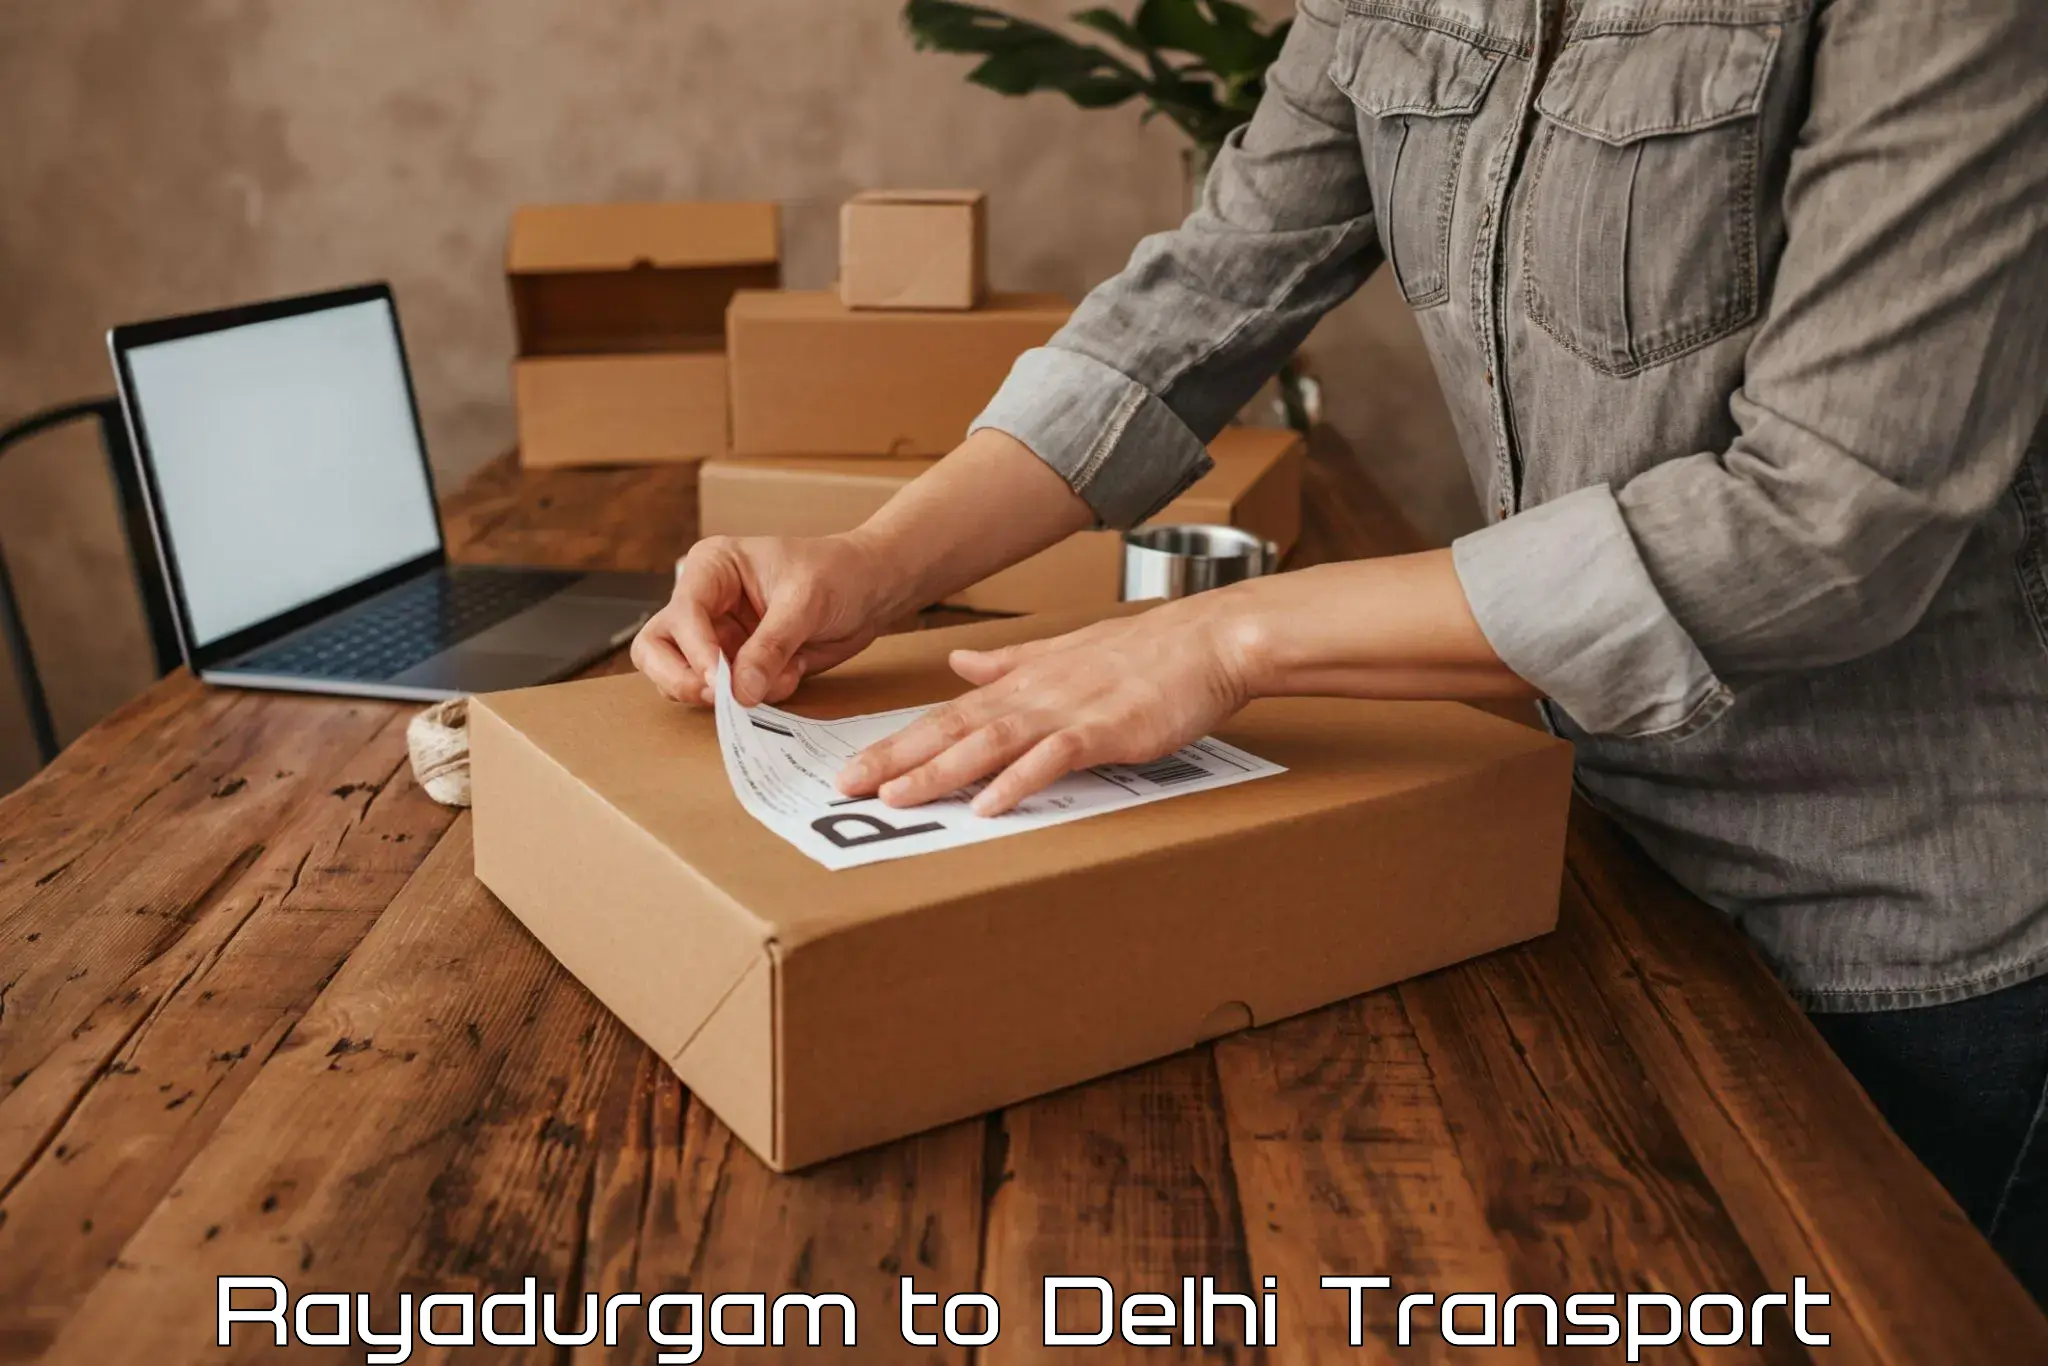 Transport bike from one state to another Rayadurgam to University of Delhi